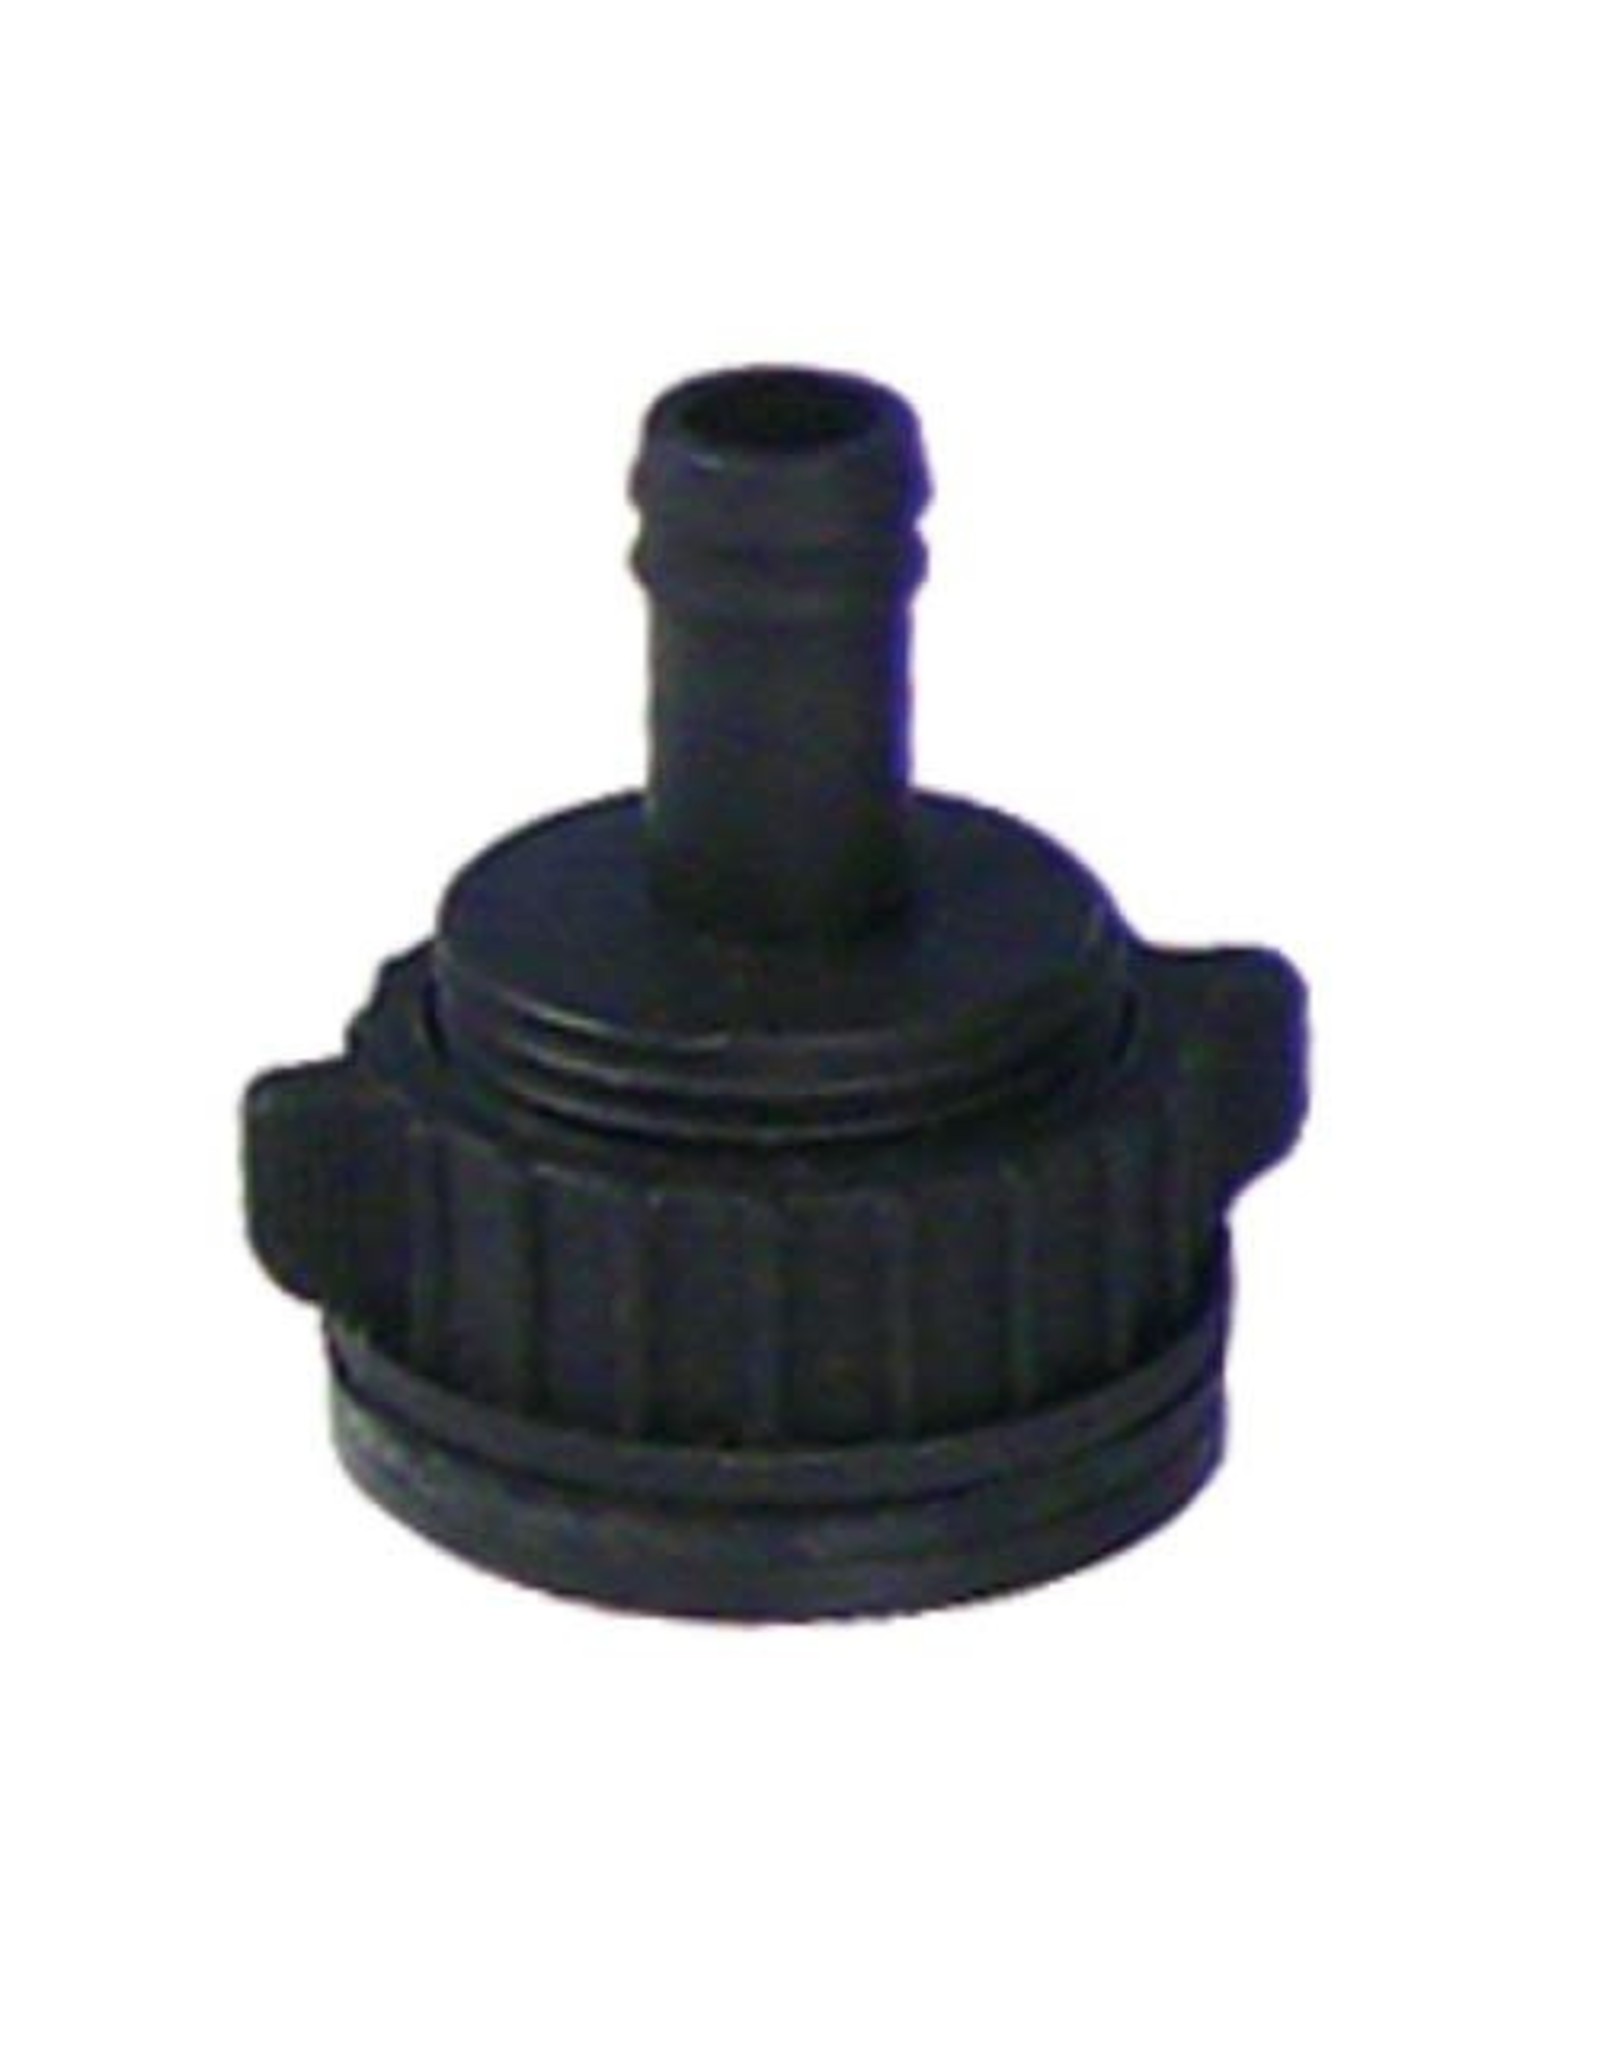 Hydro Flow Hydro Flow Ebb & Flow Tub Outlet Fitting 1/2 in (13mm)